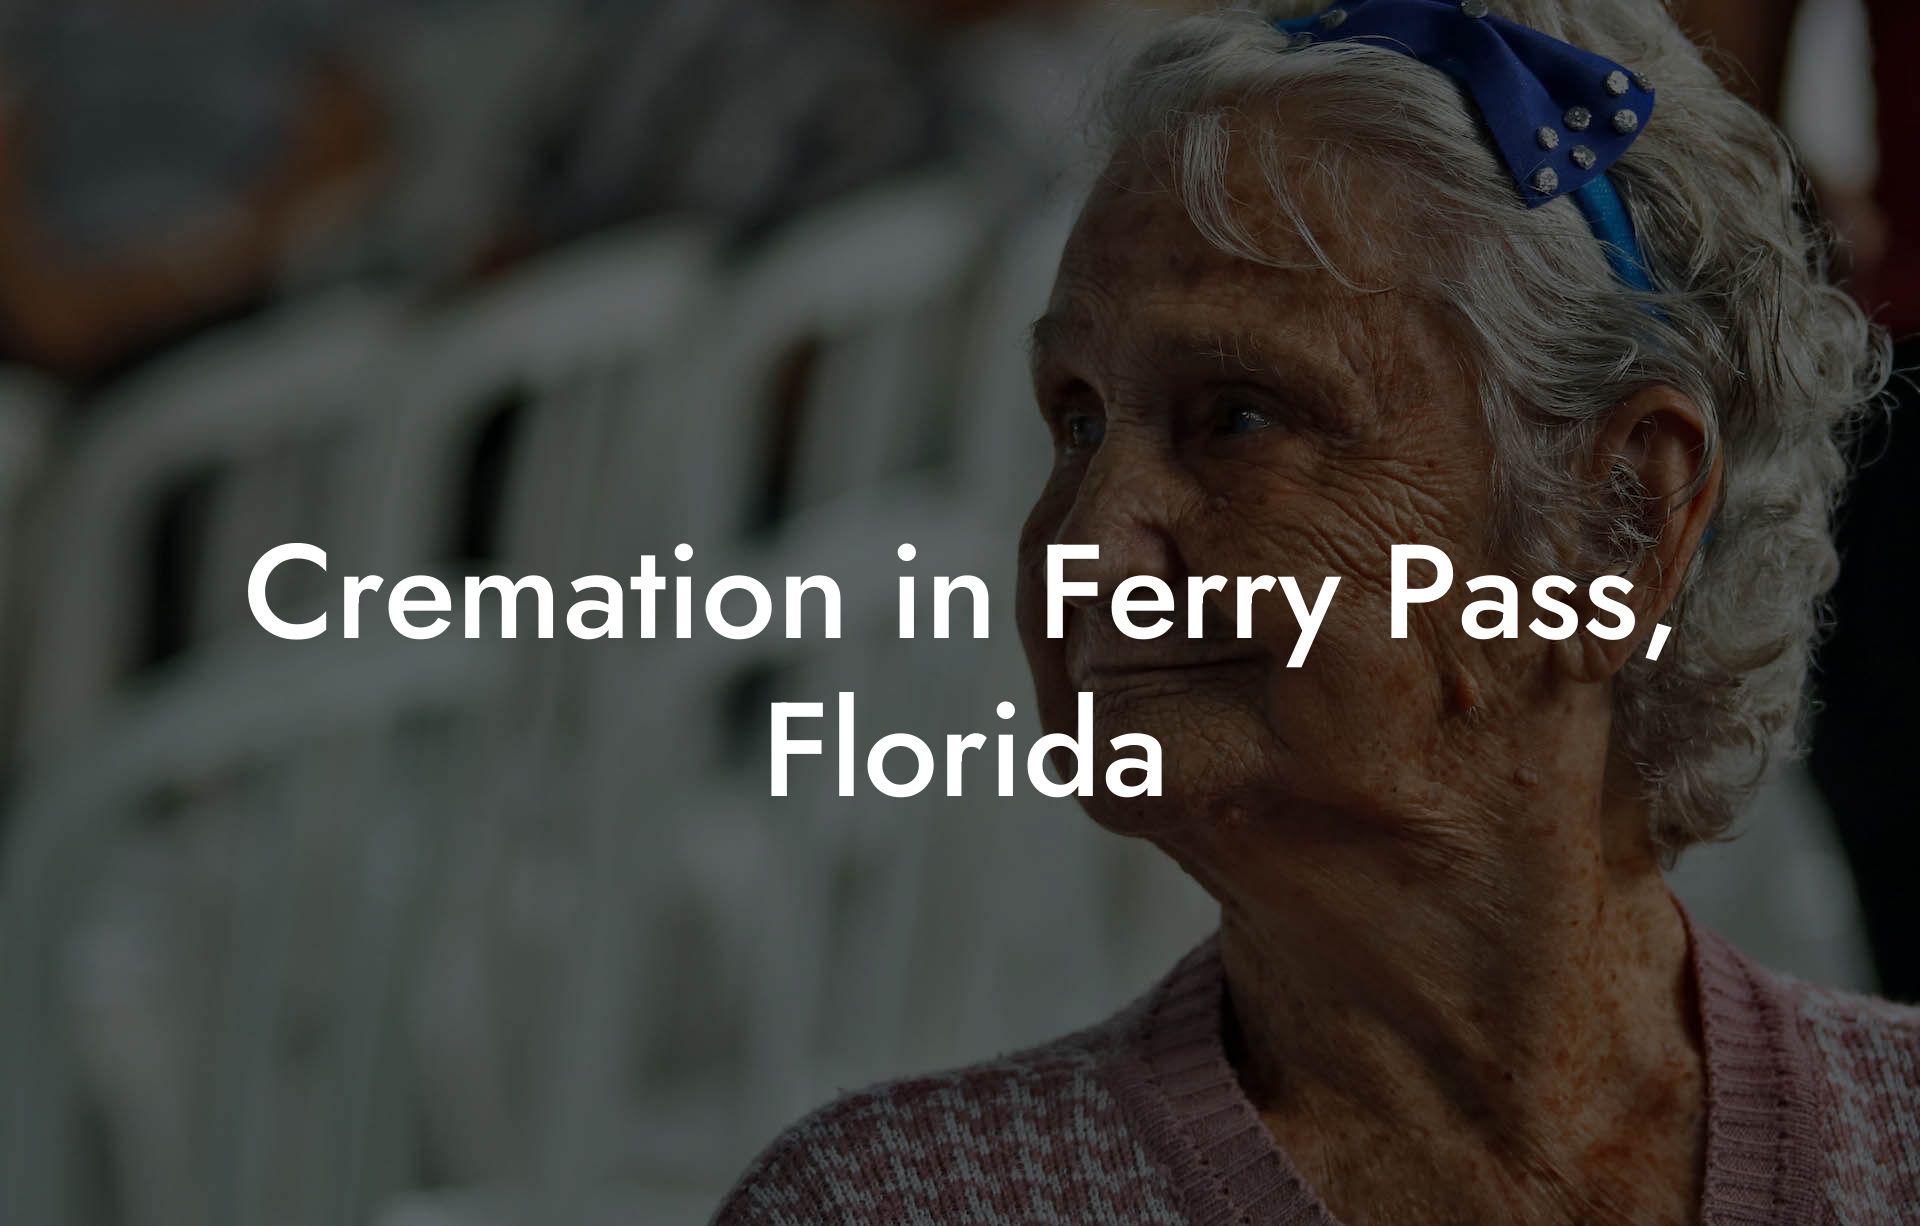 Cremation in Ferry Pass, Florida